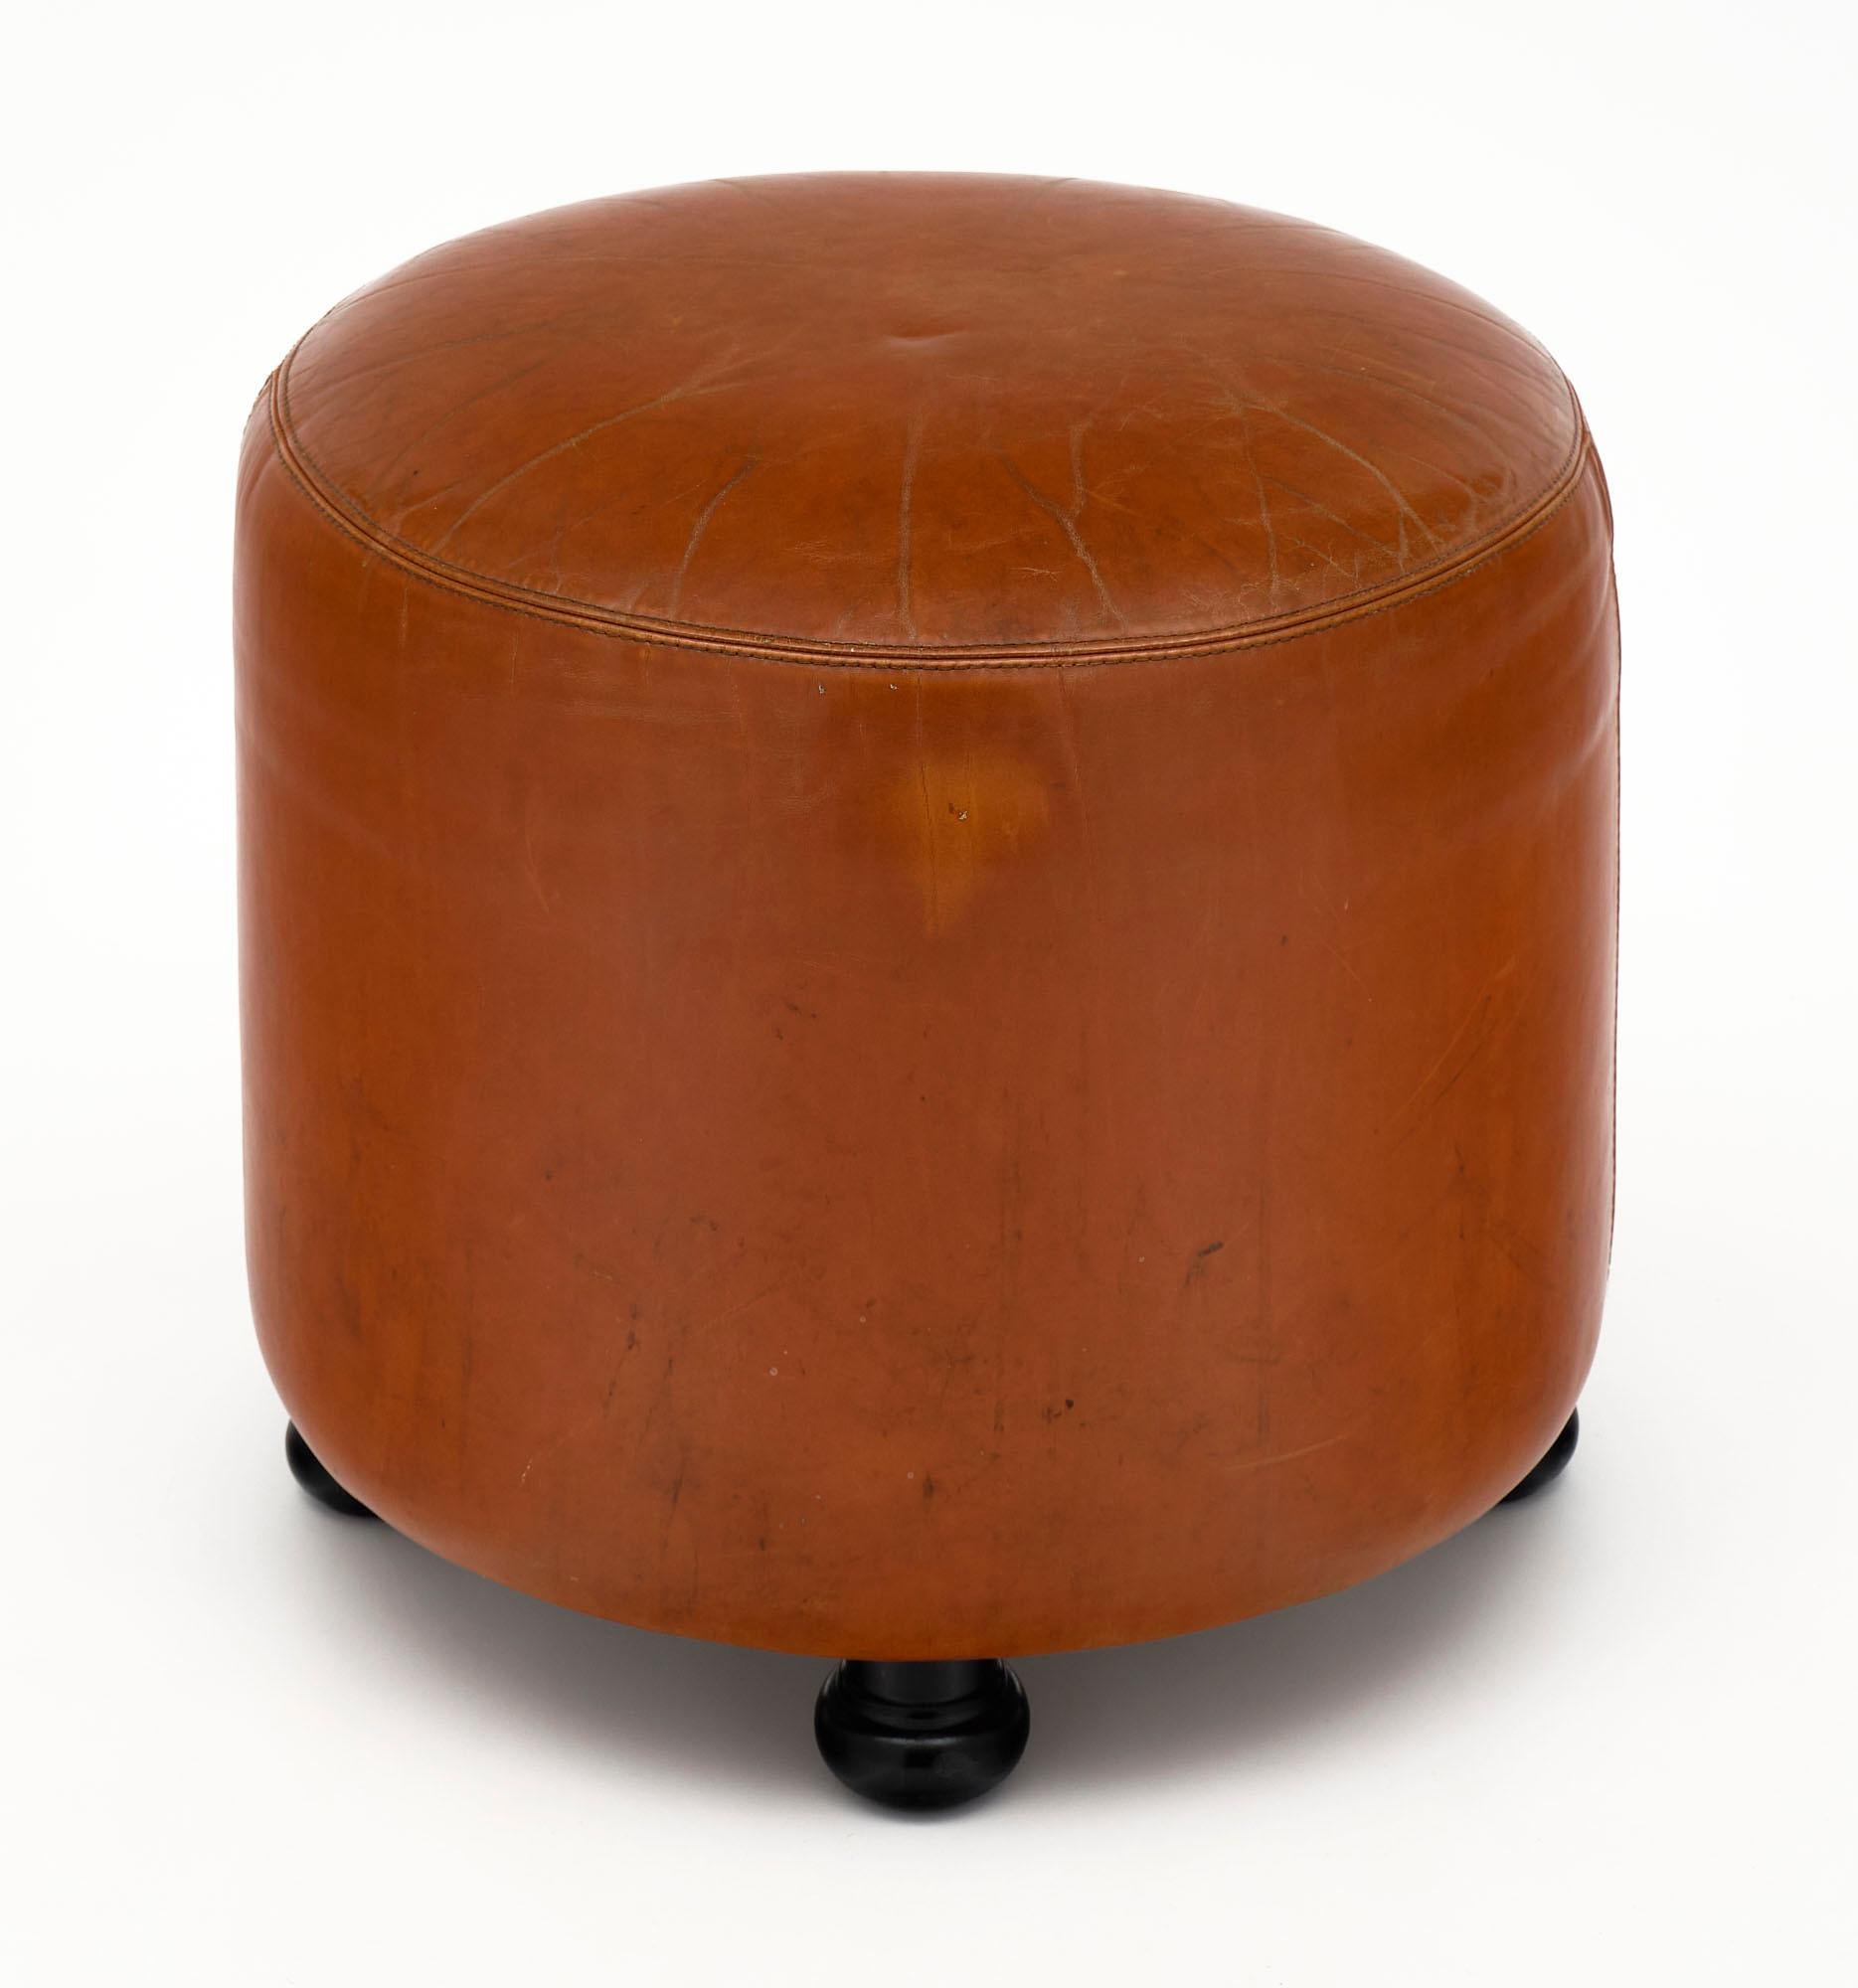 Stool from Milan, Italy with the original leather upholstery and wooden legs. There is a chair available as well that can be paired with it.